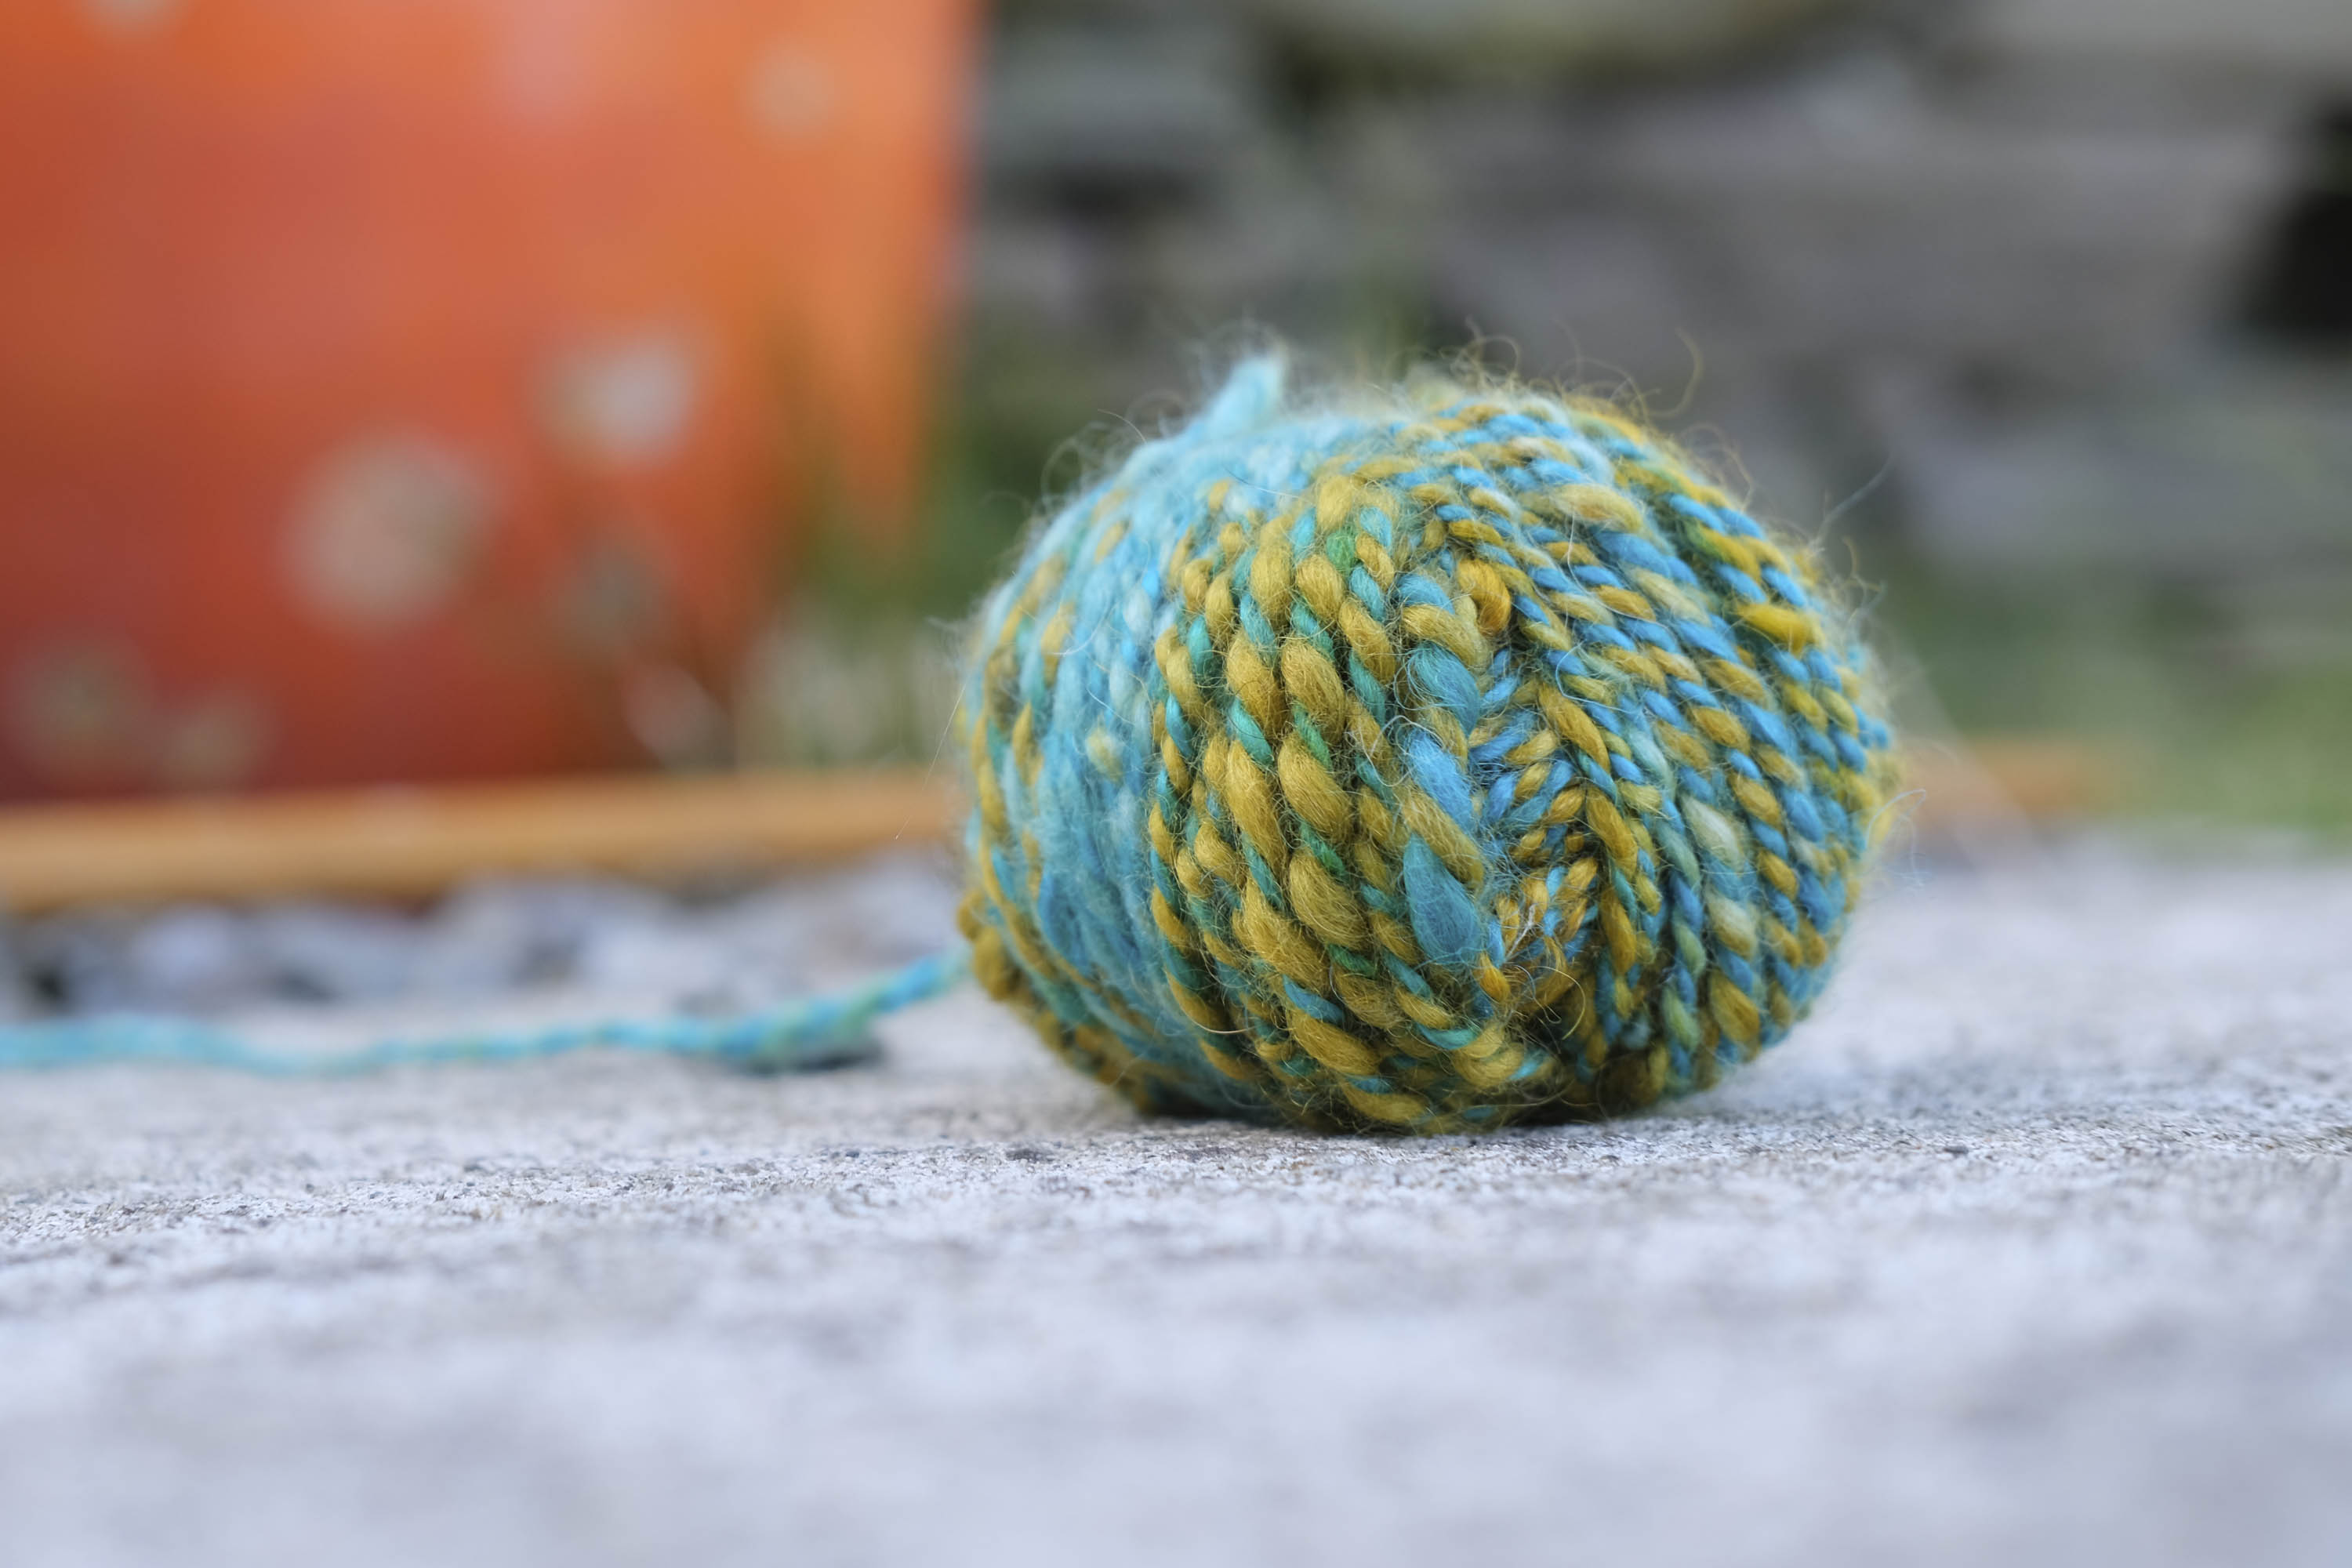 Ball of handspun, hand-dyed yarn in yellows, greens and turquoise in two ply